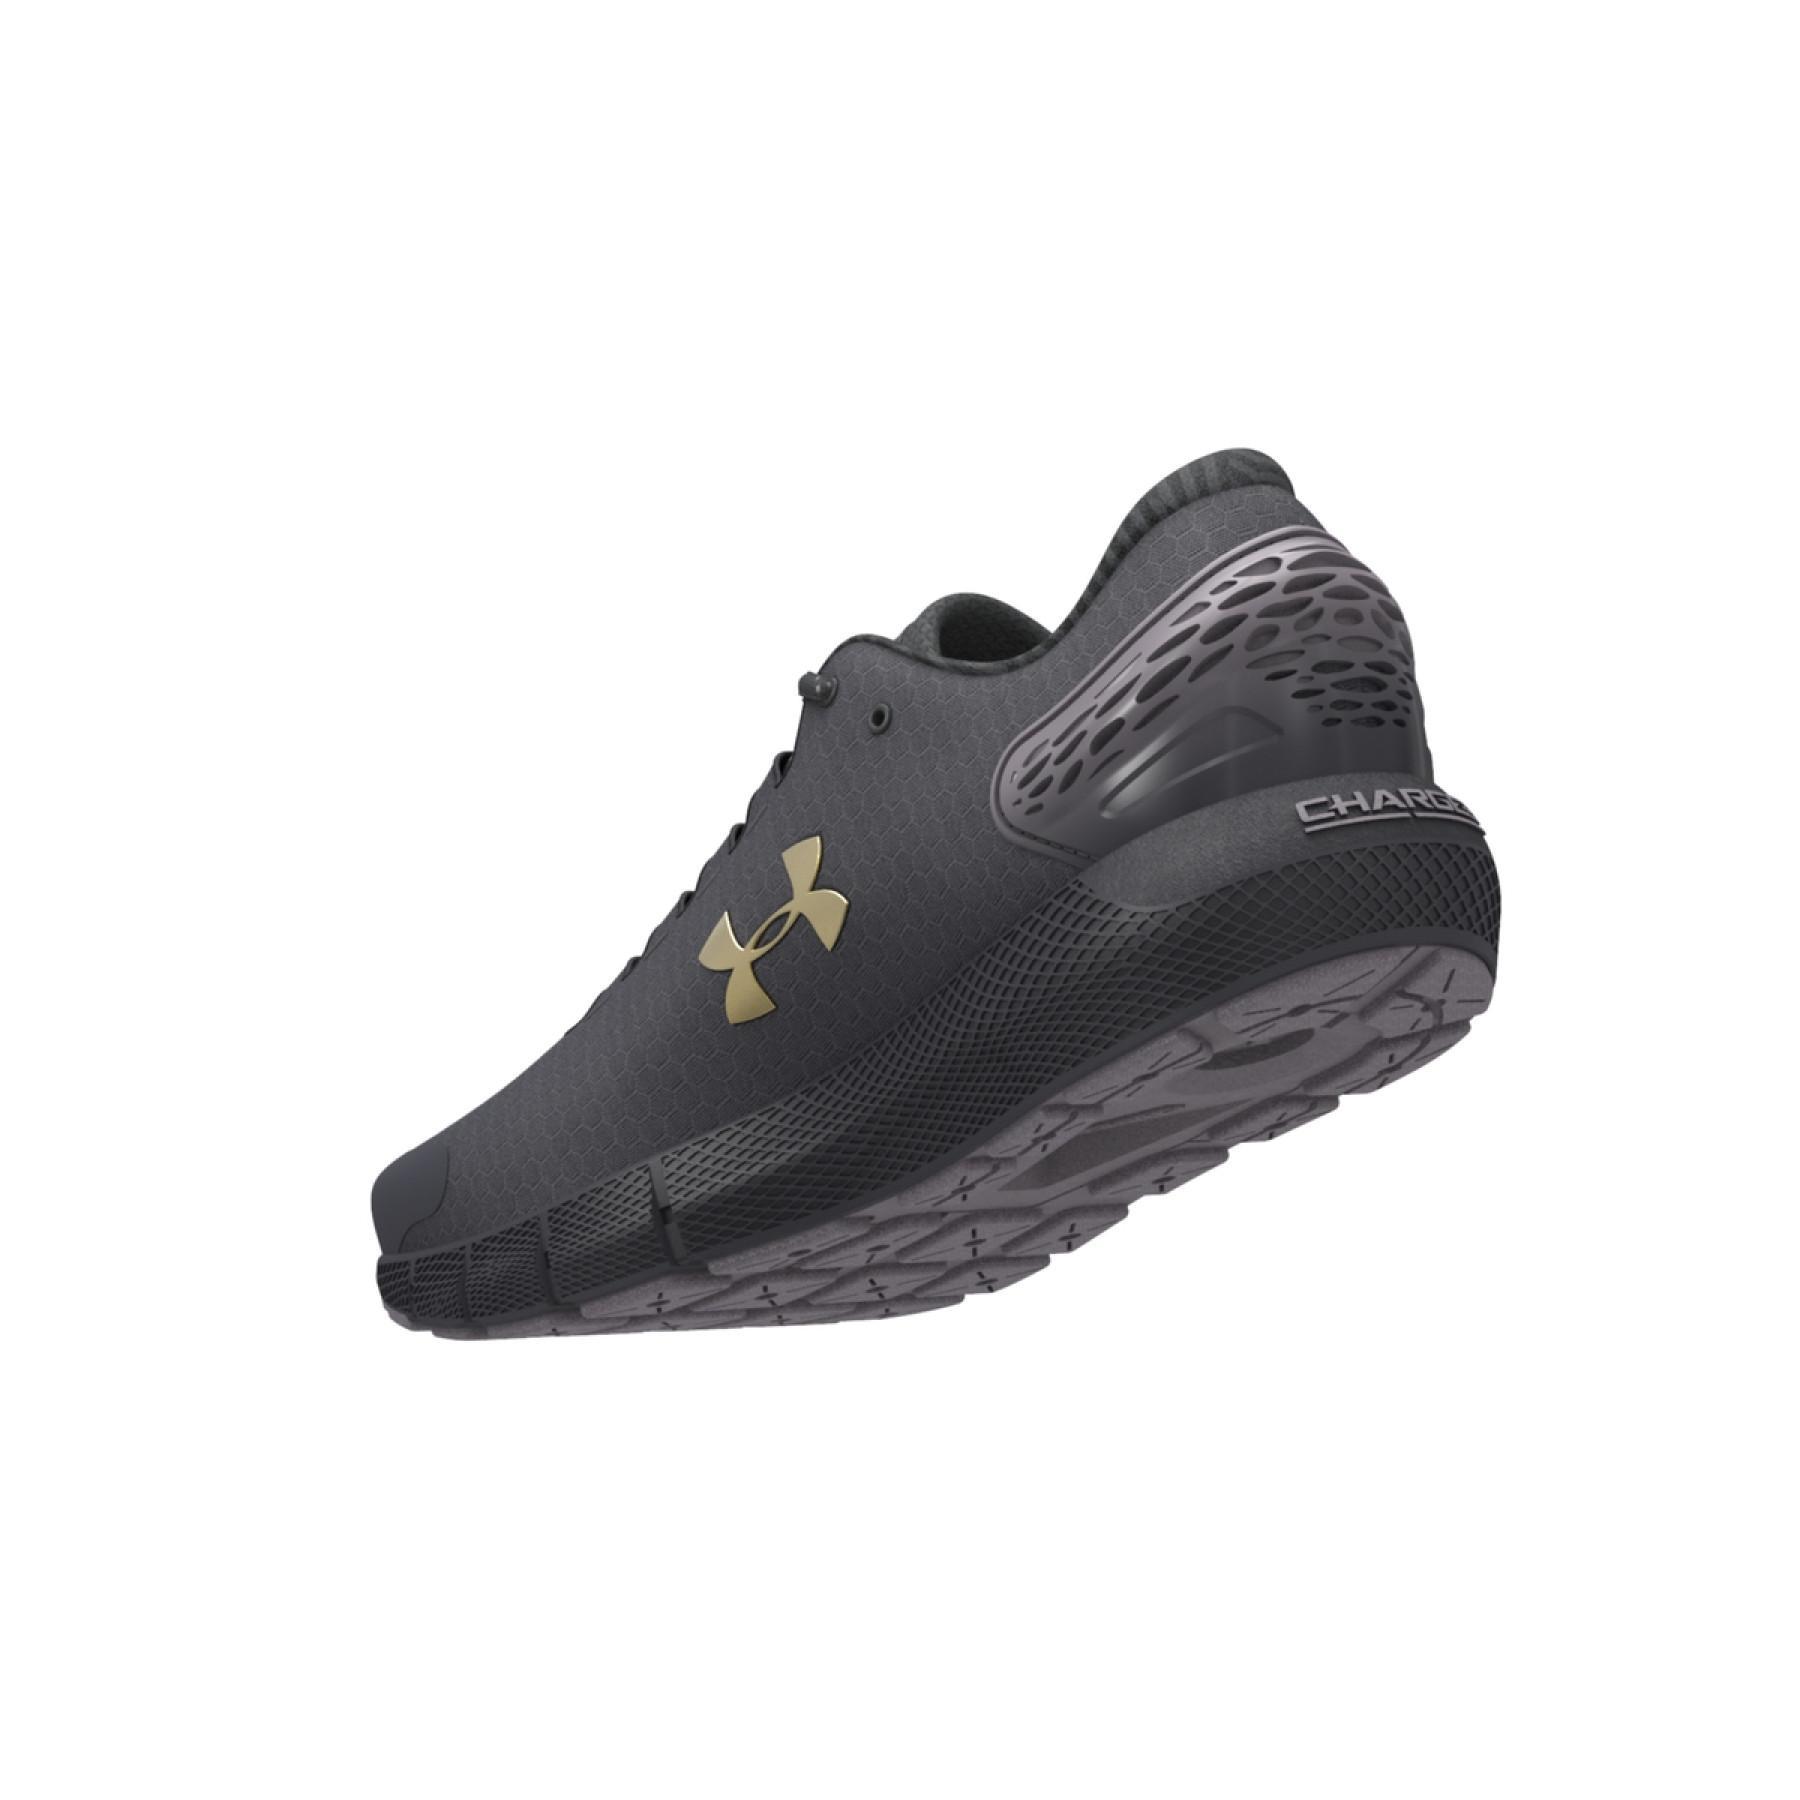 Running shoes Under Armour Charged Rogue 2 ColdGear Infrared